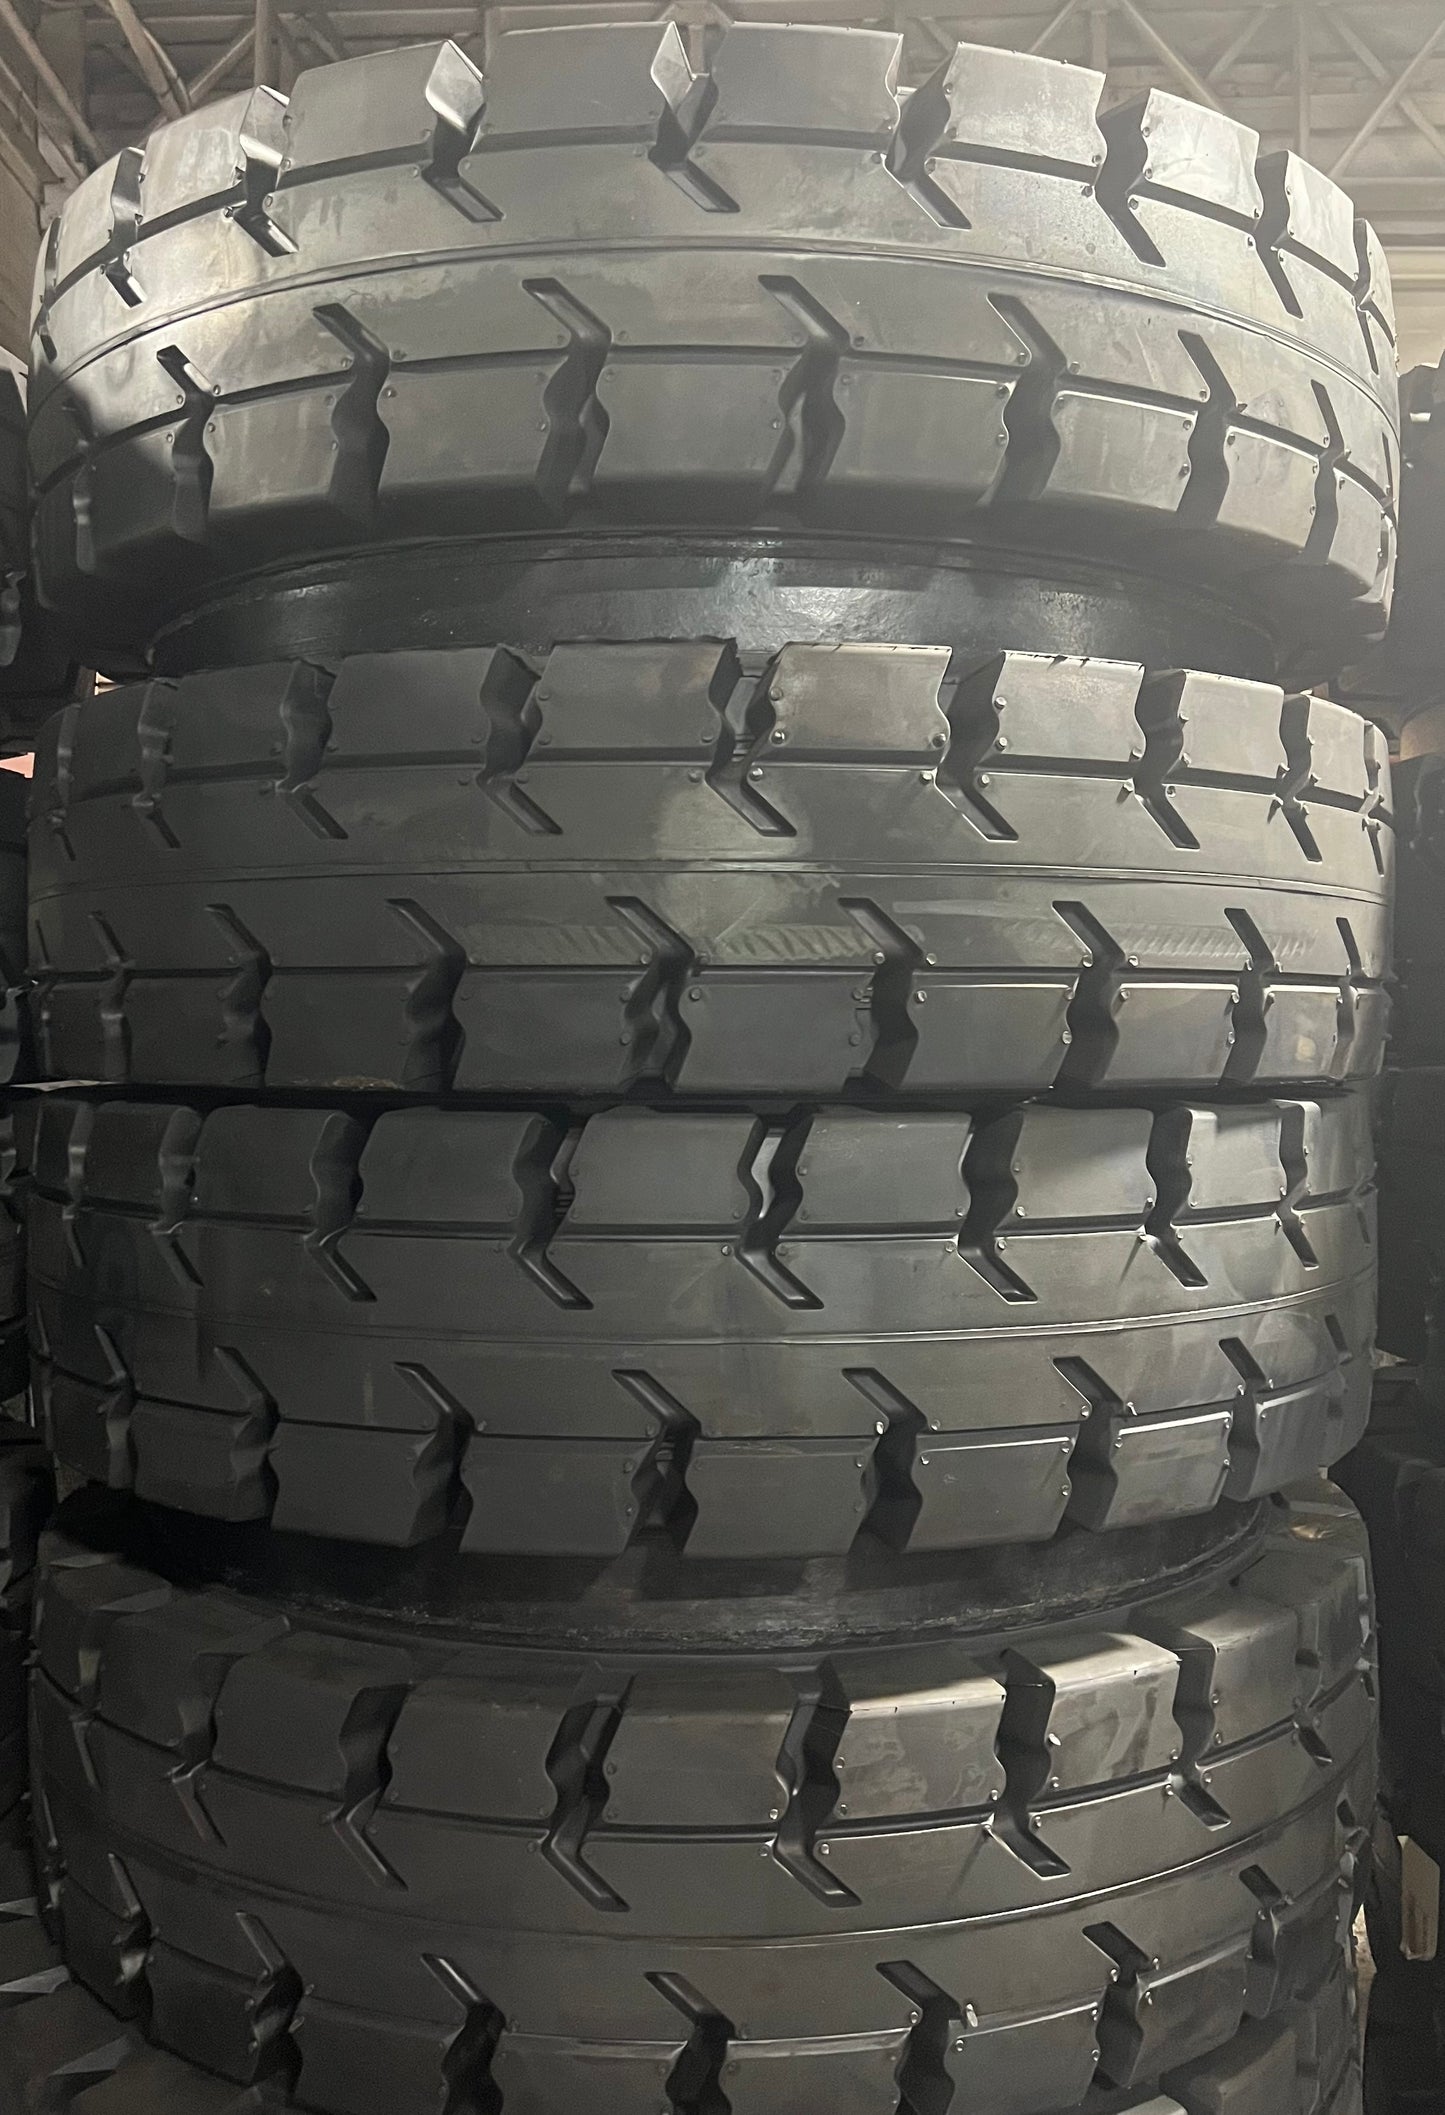 Magna Solid Rubber 10.00-20 Twin Wheel Tires on Rims